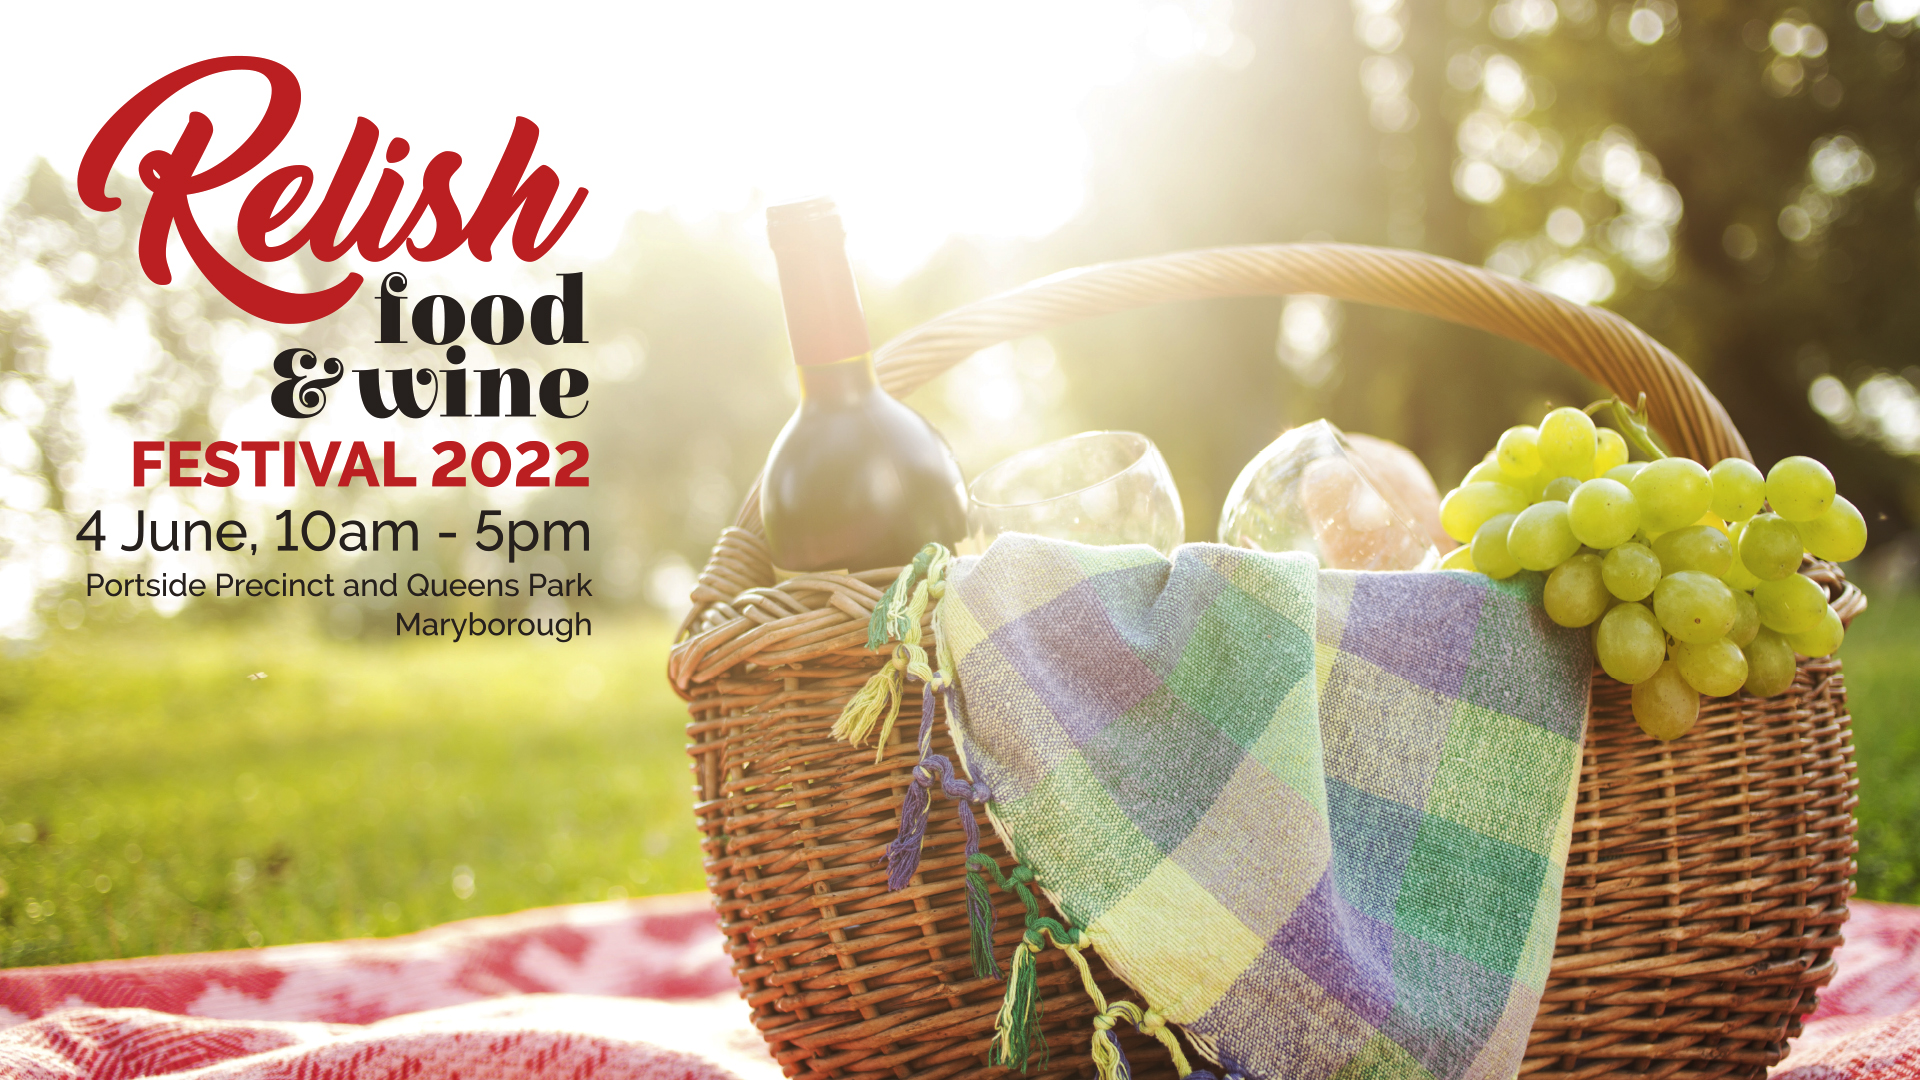 Relish Food & Wine Festival Returns to Maryborough in 2022 for its biggest  year yet!